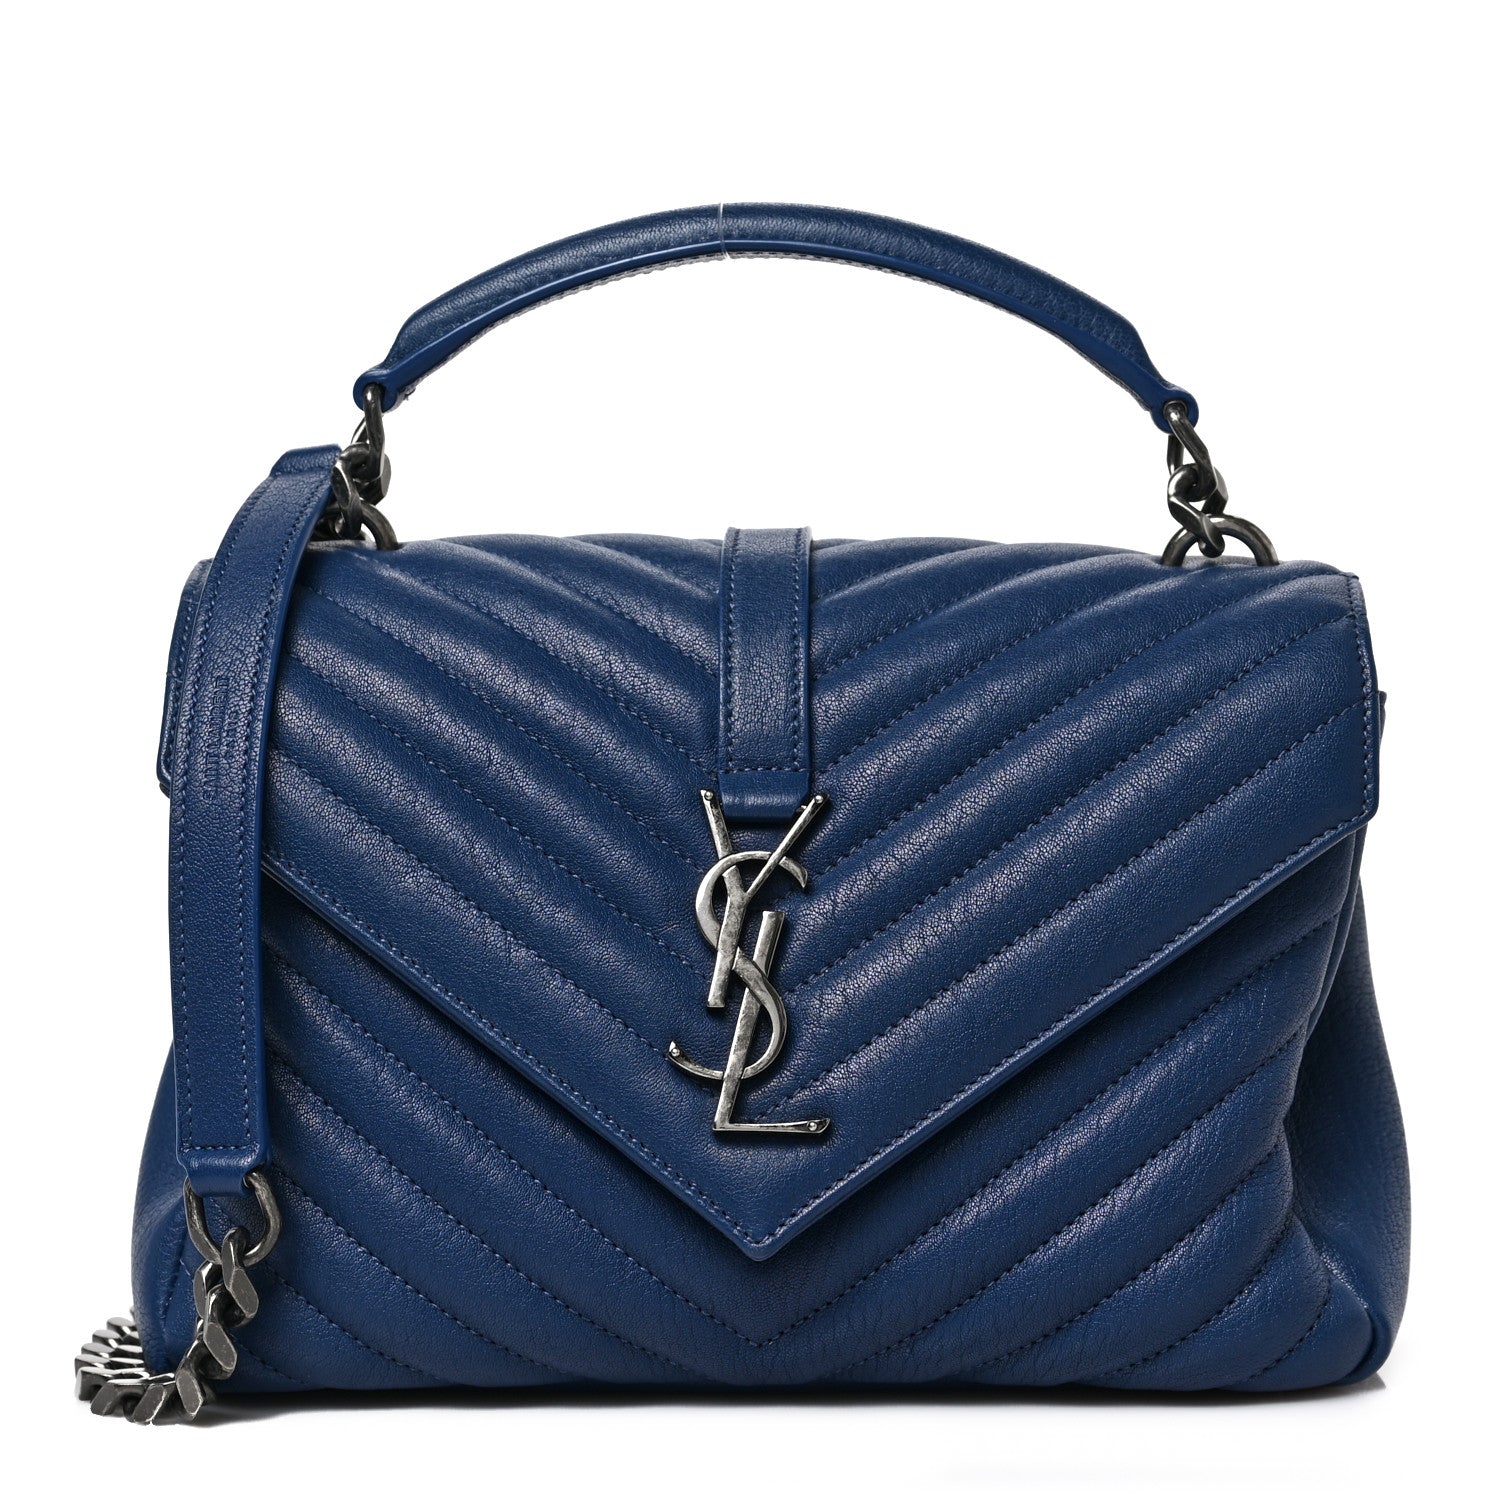 is ysl a luxury brand college bag